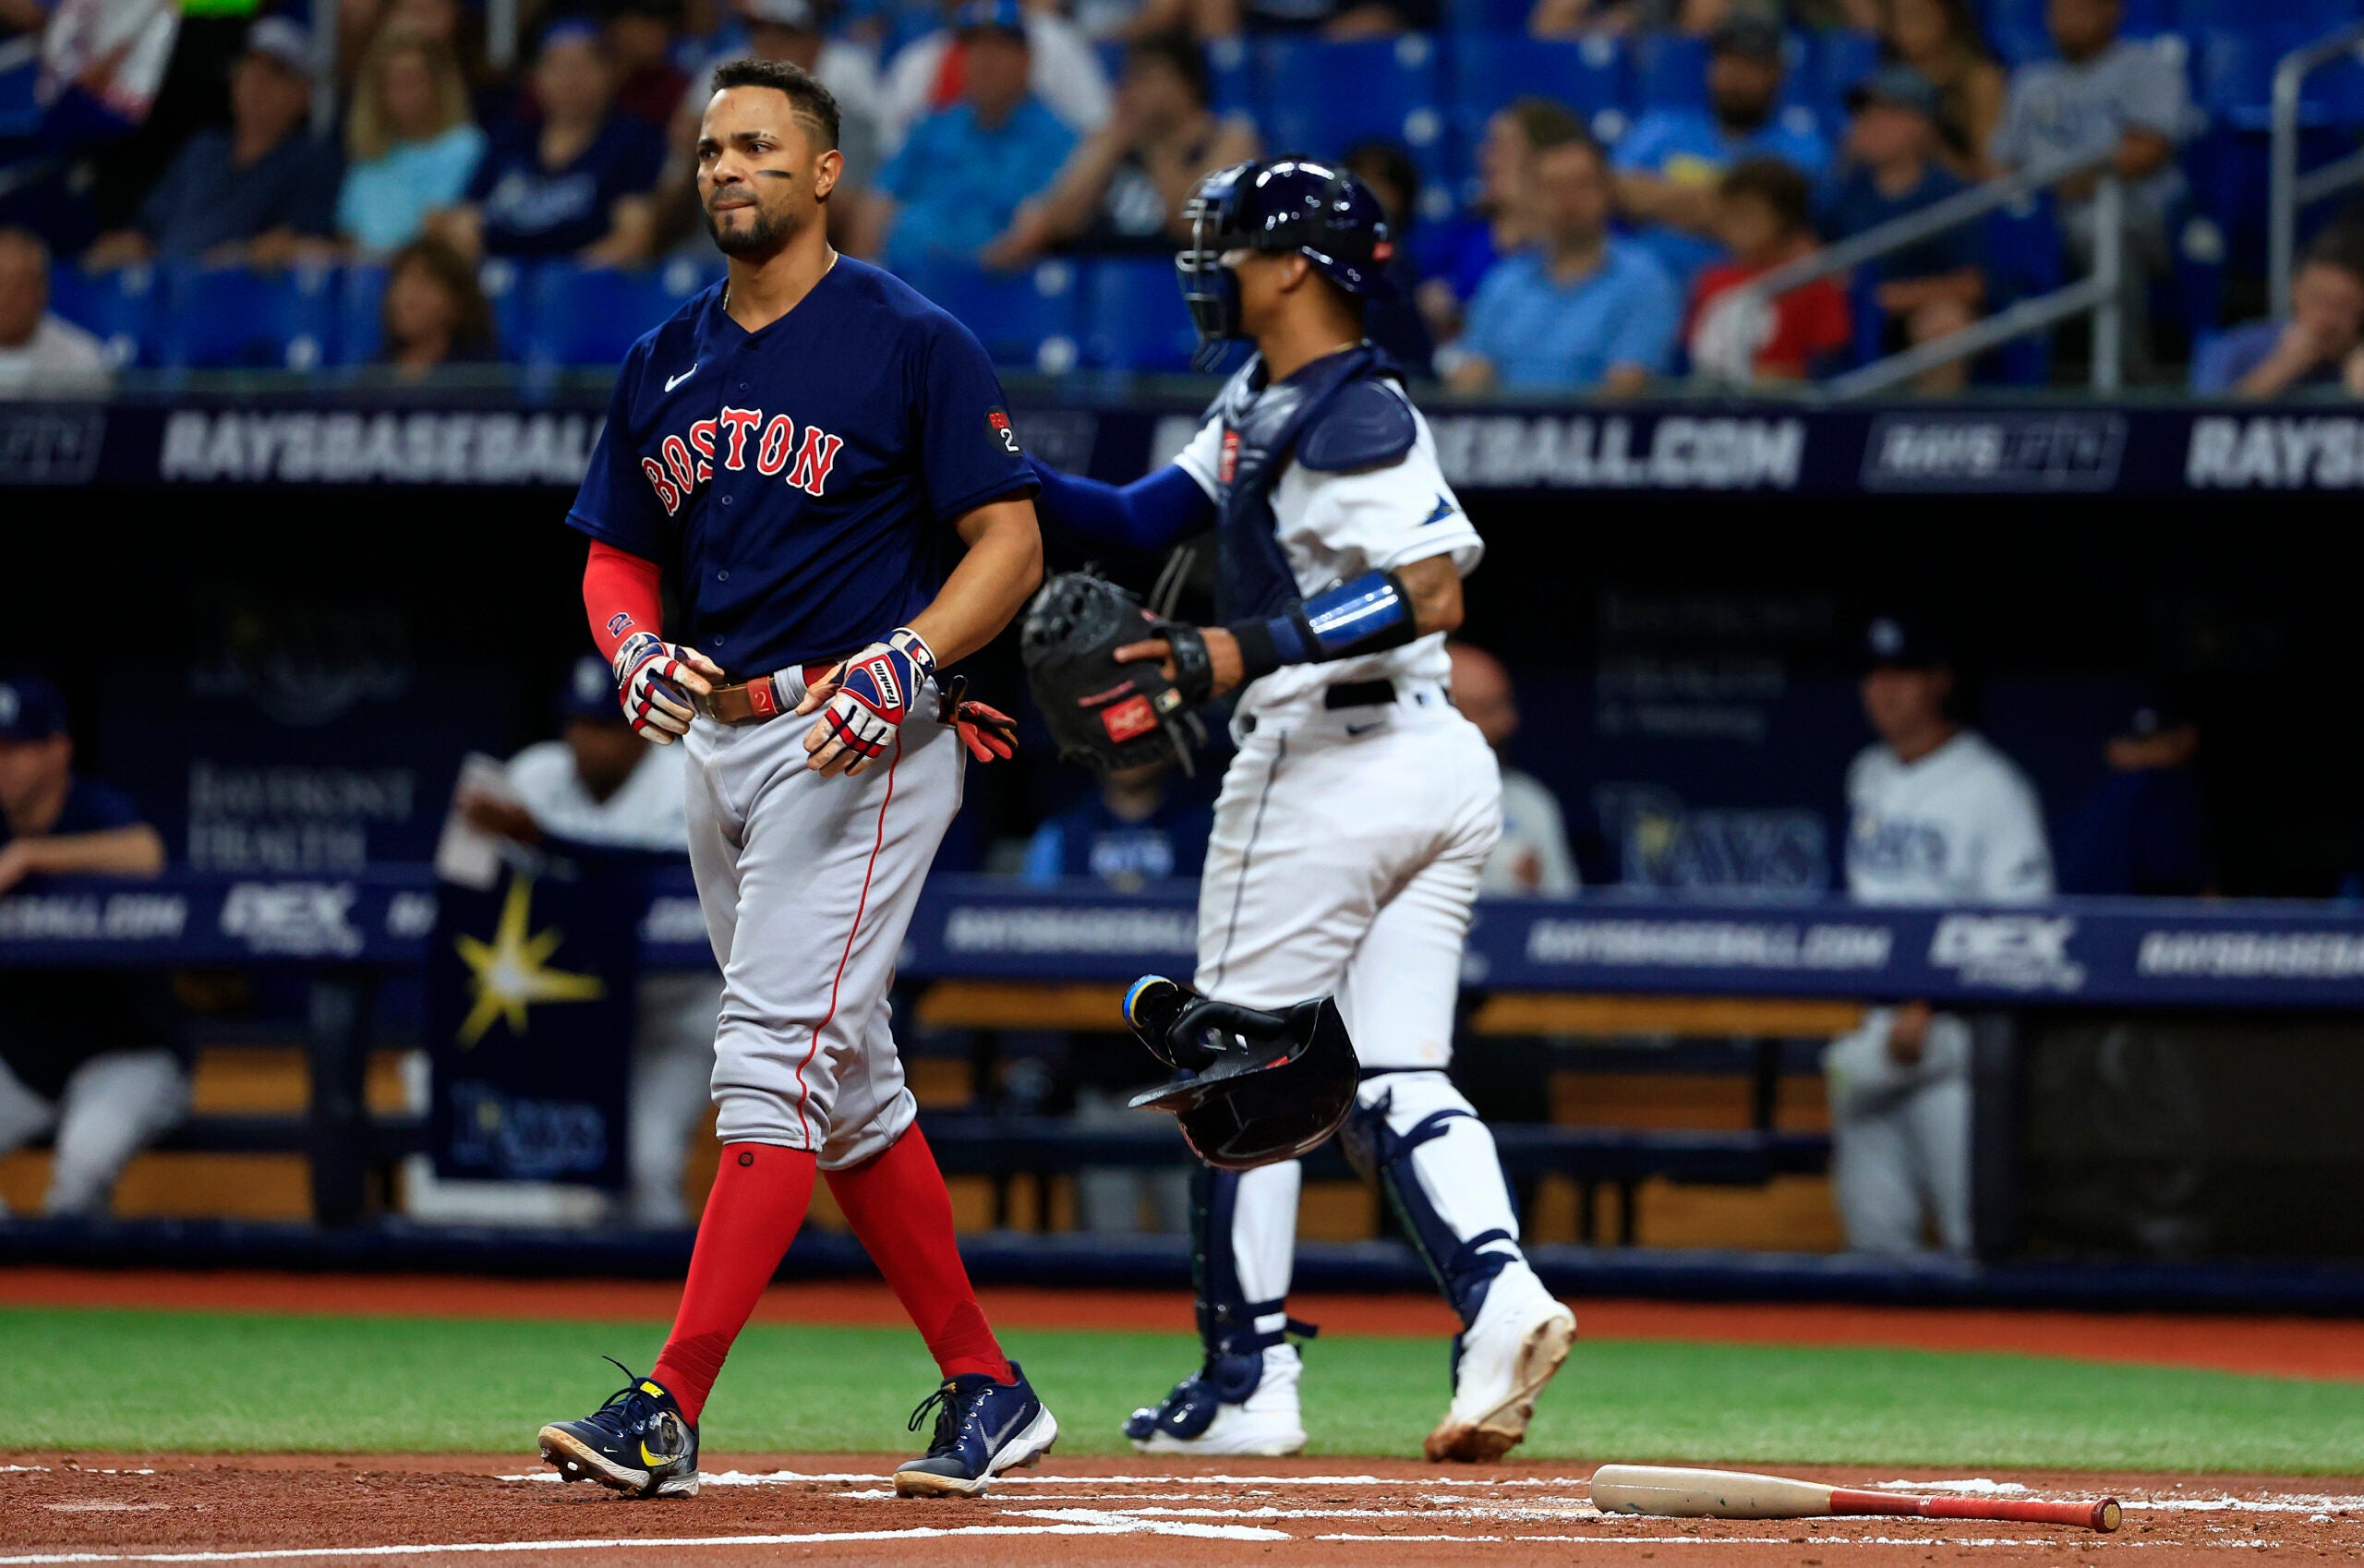 Xander Bogaerts laments after striking out against the Rays.